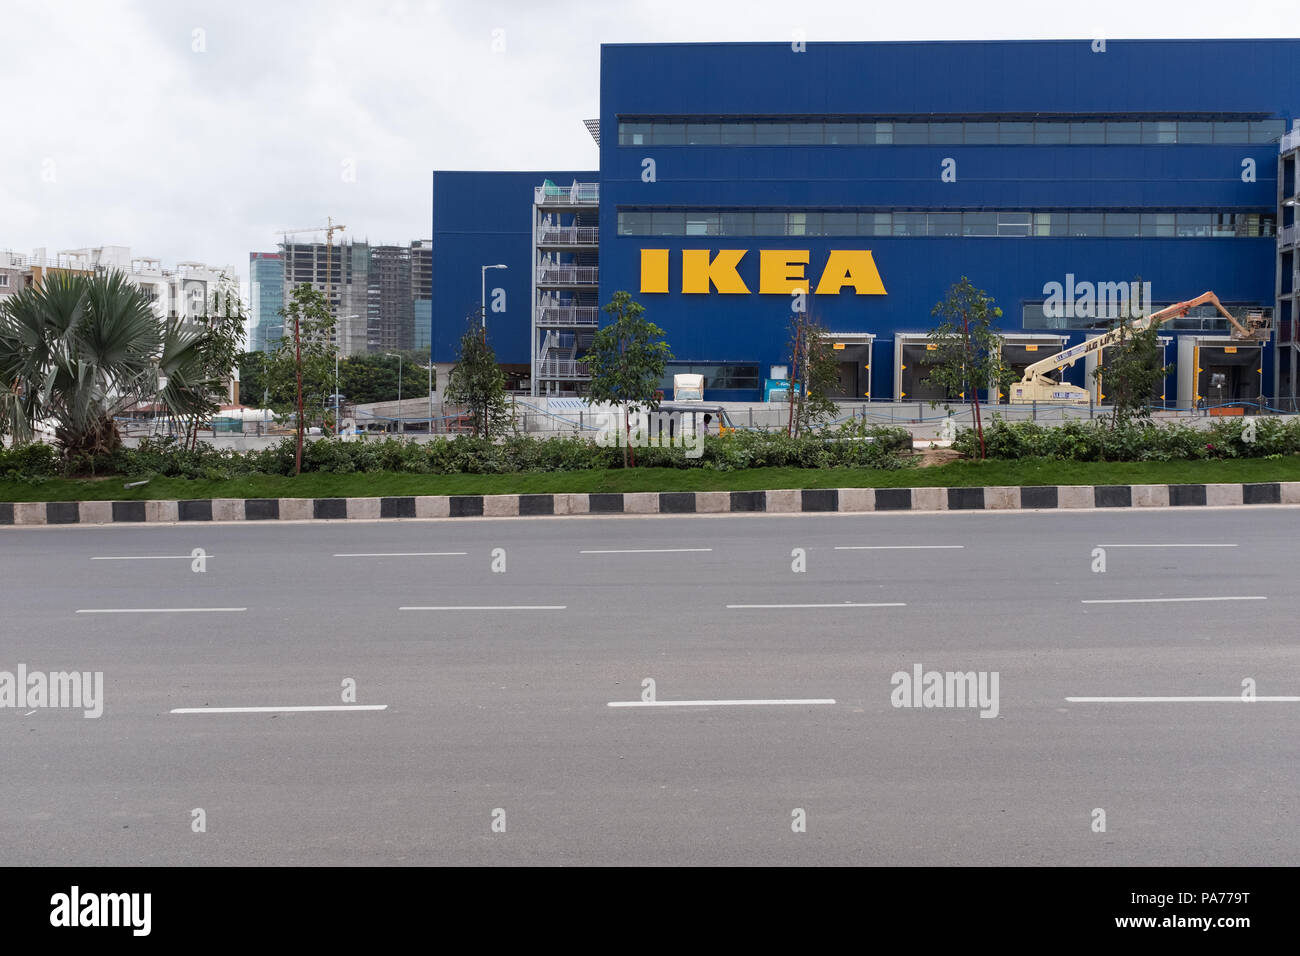 Ikea Hyderabad High Resolution Stock Photography and Images - Alamy